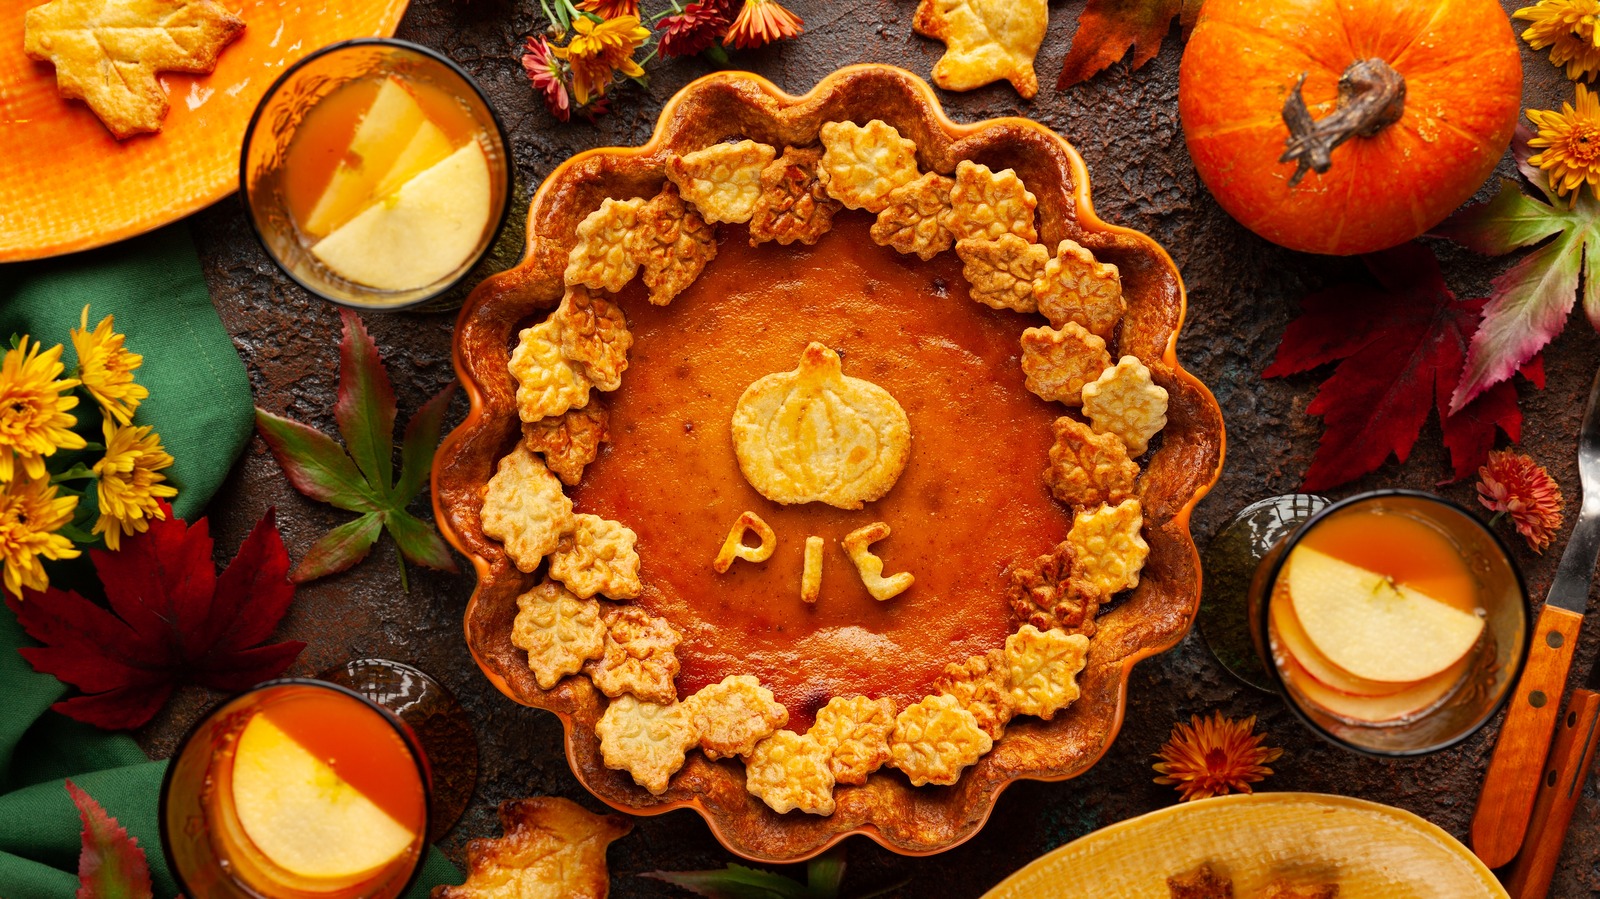 What To Look For When Choosing A Pie Pumpkin